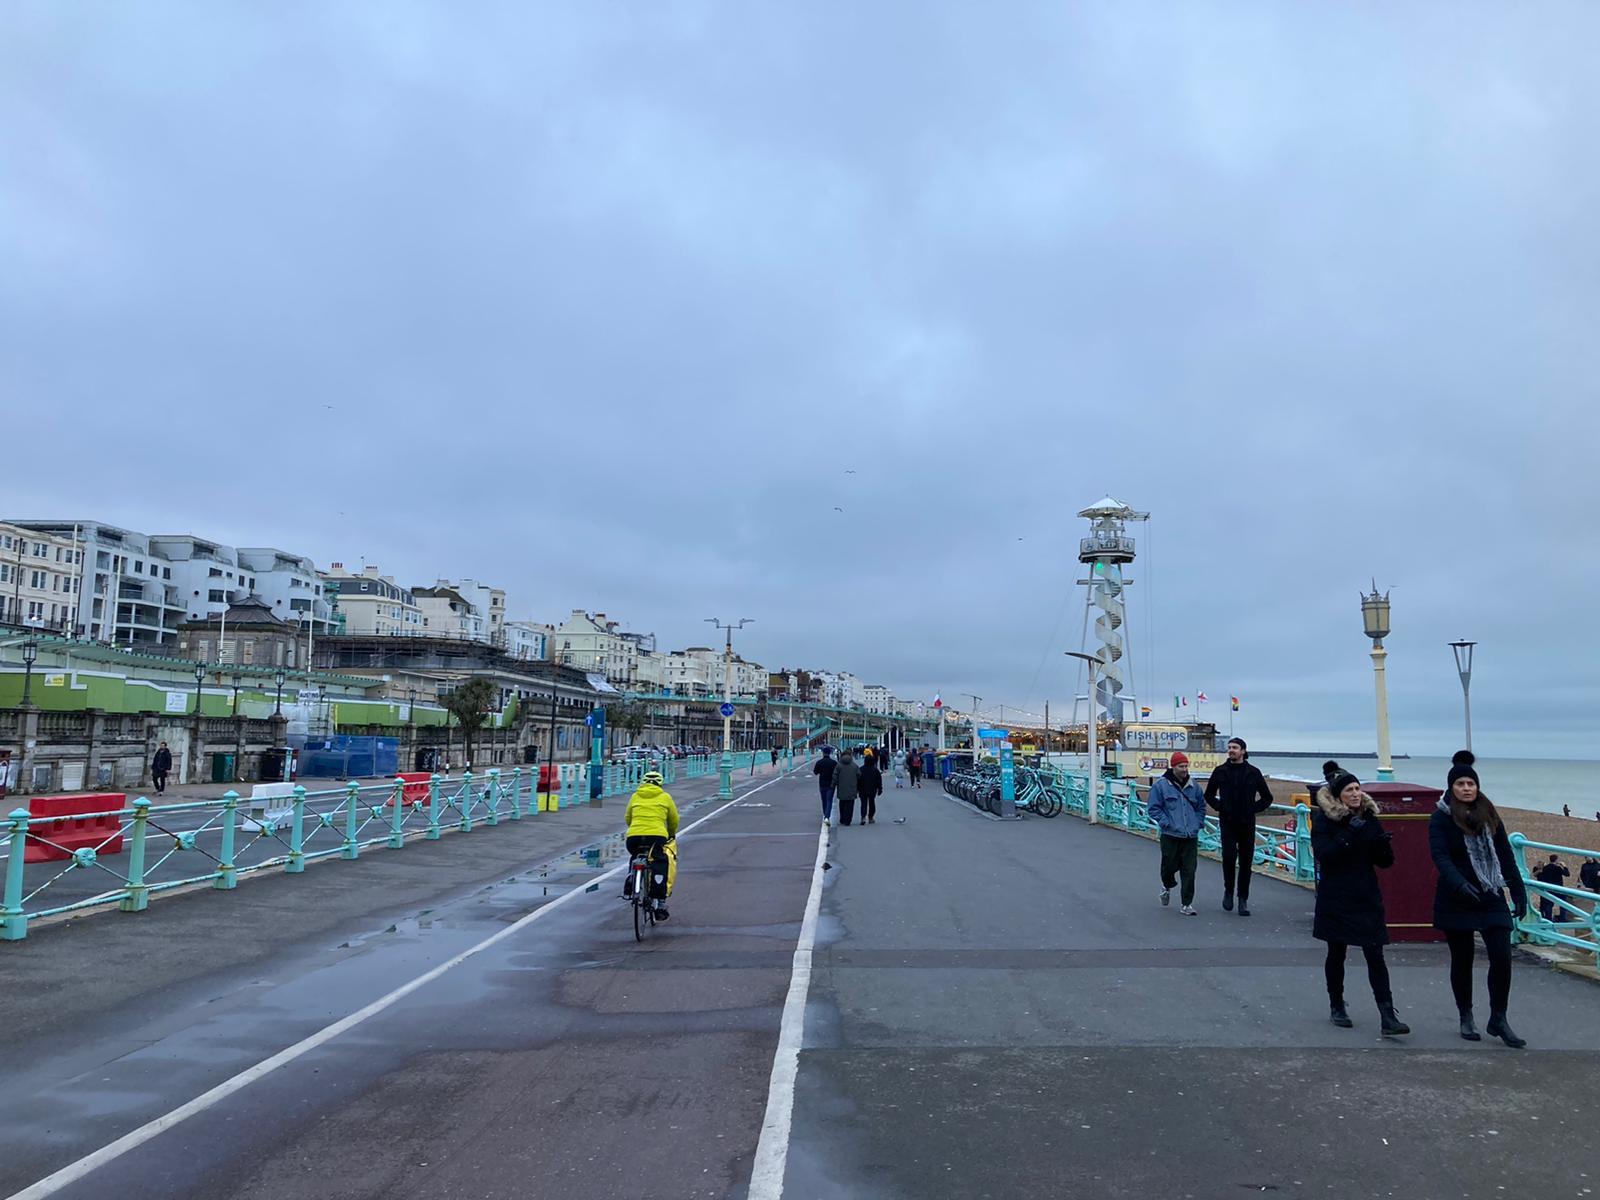 Brighton and Hove during the third national lockdown